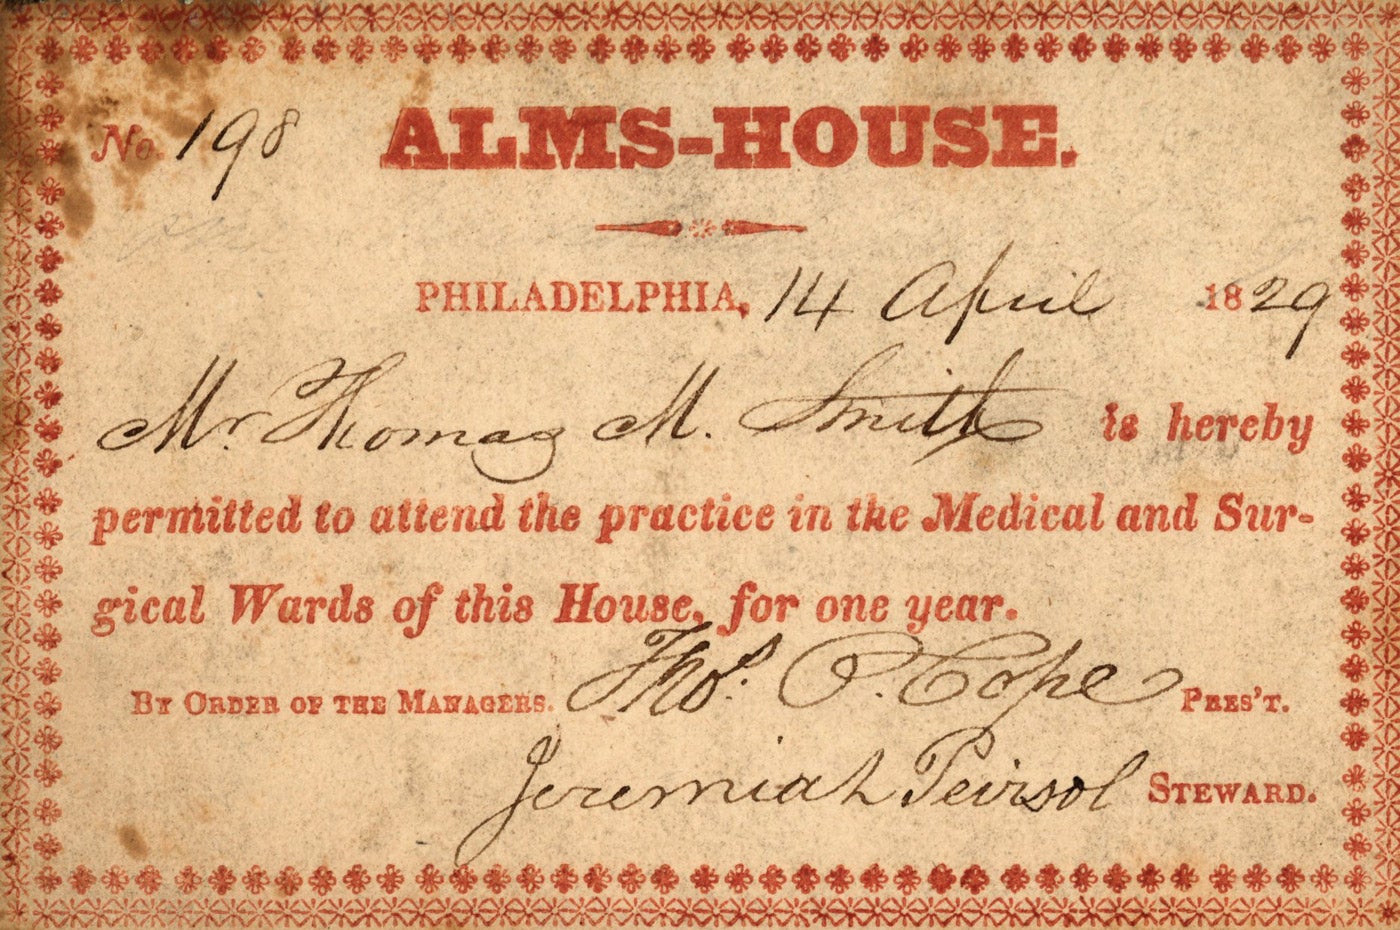 Admission ticket, to observe medical practices at the Alms-House for one year, signed by Thomas P. Cope and Jeremiah Peirsol, 1829